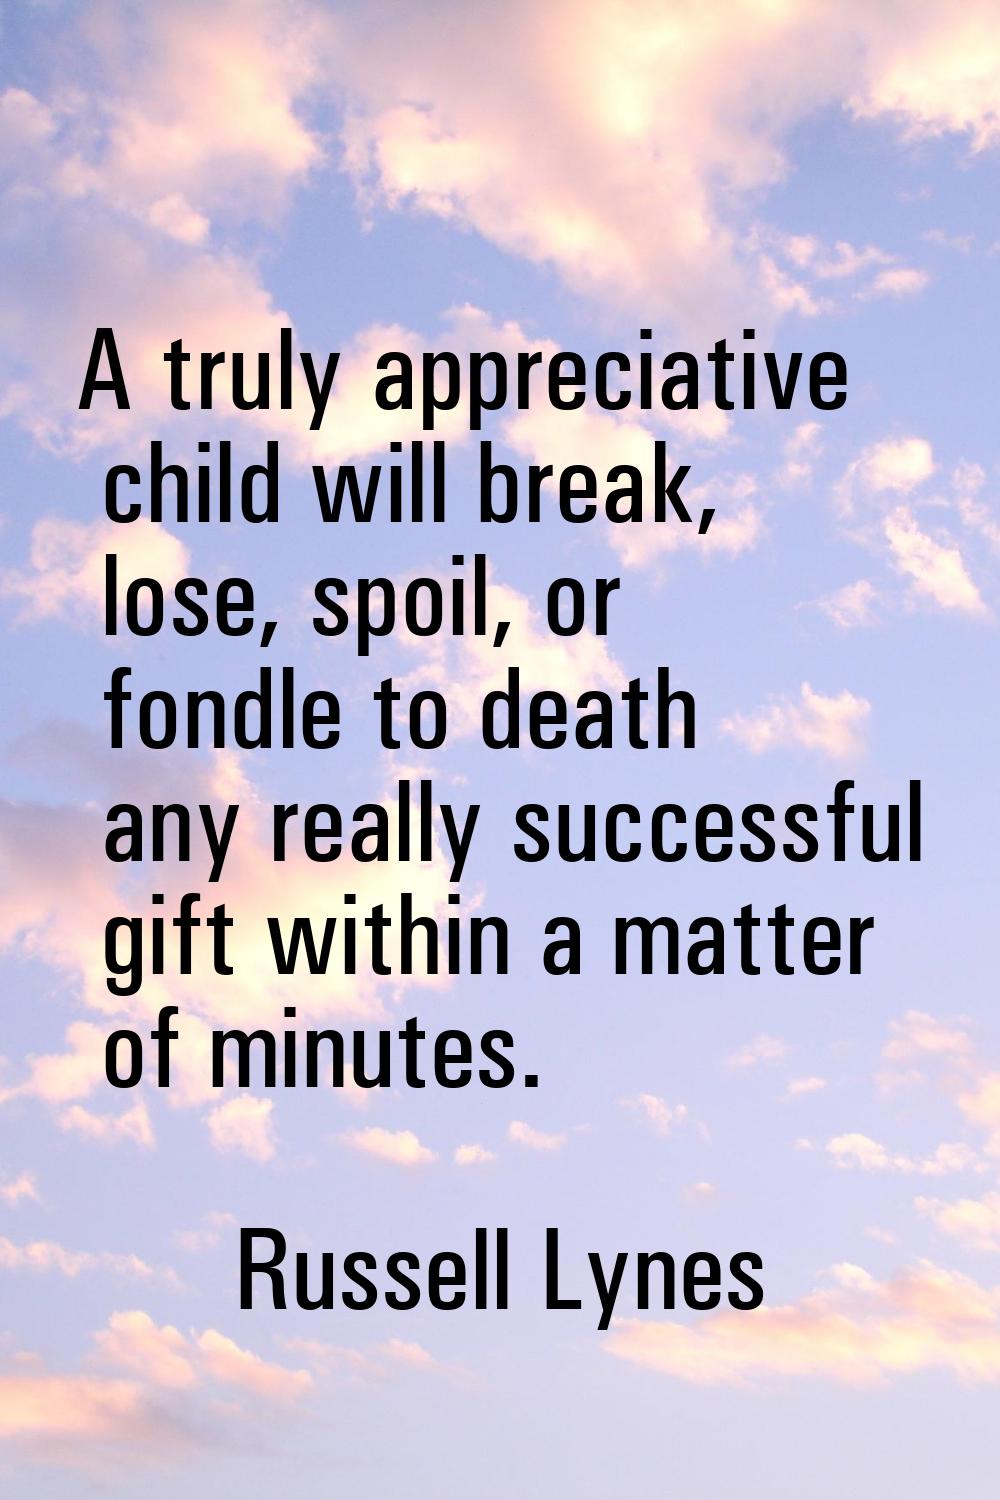 A truly appreciative child will break, lose, spoil, or fondle to death any really successful gift w